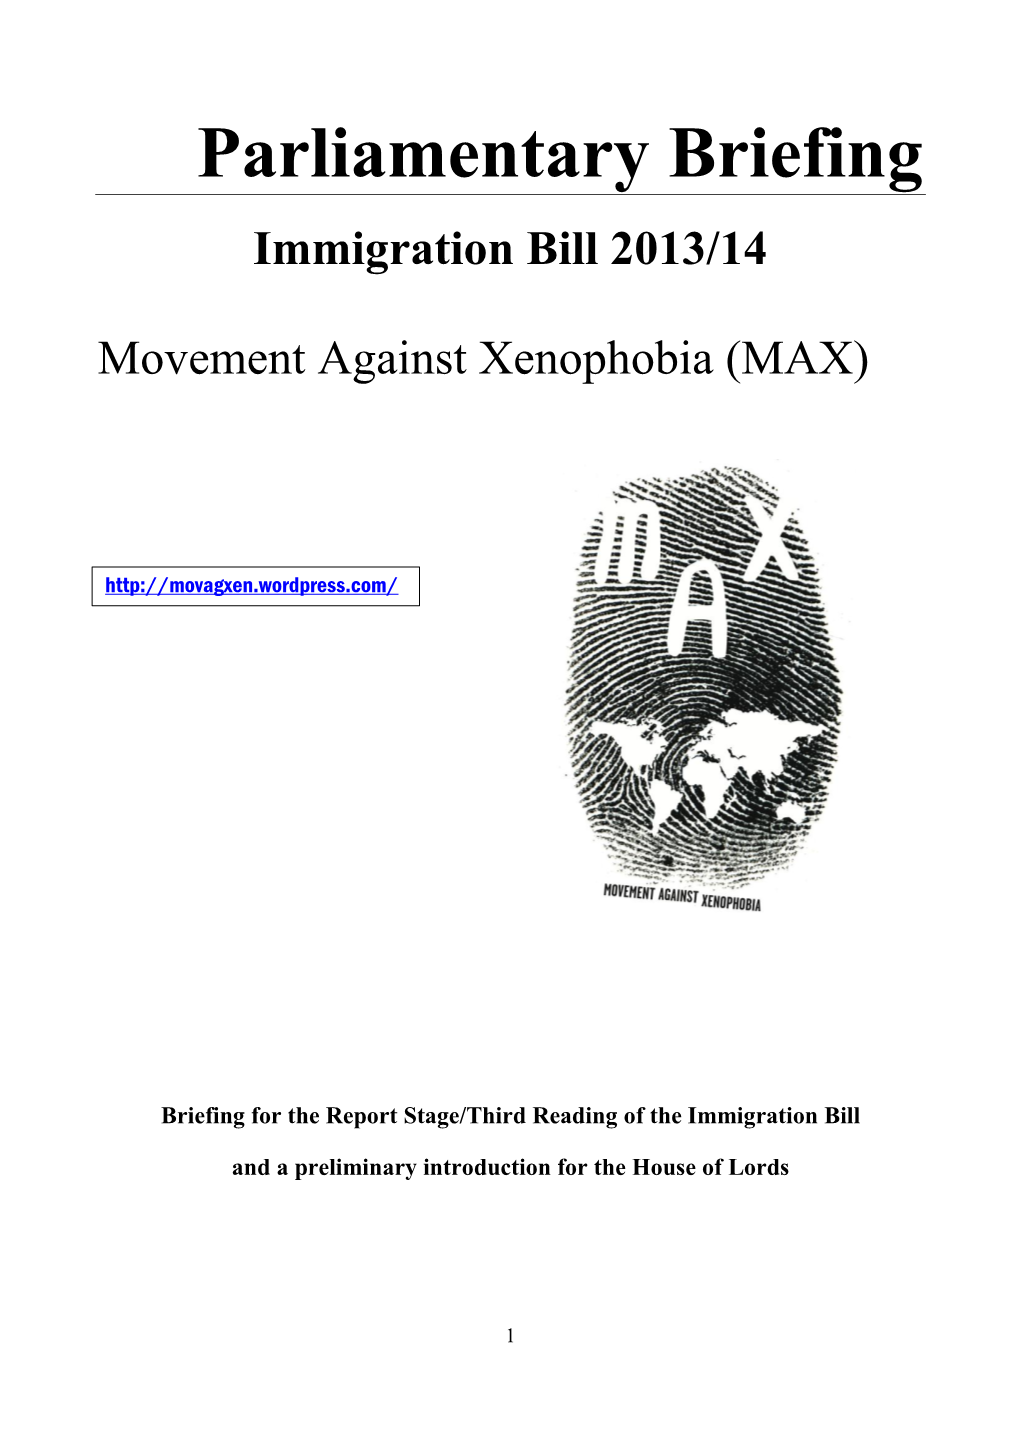 Parliamentary Briefing Immigration Bill 2013/14